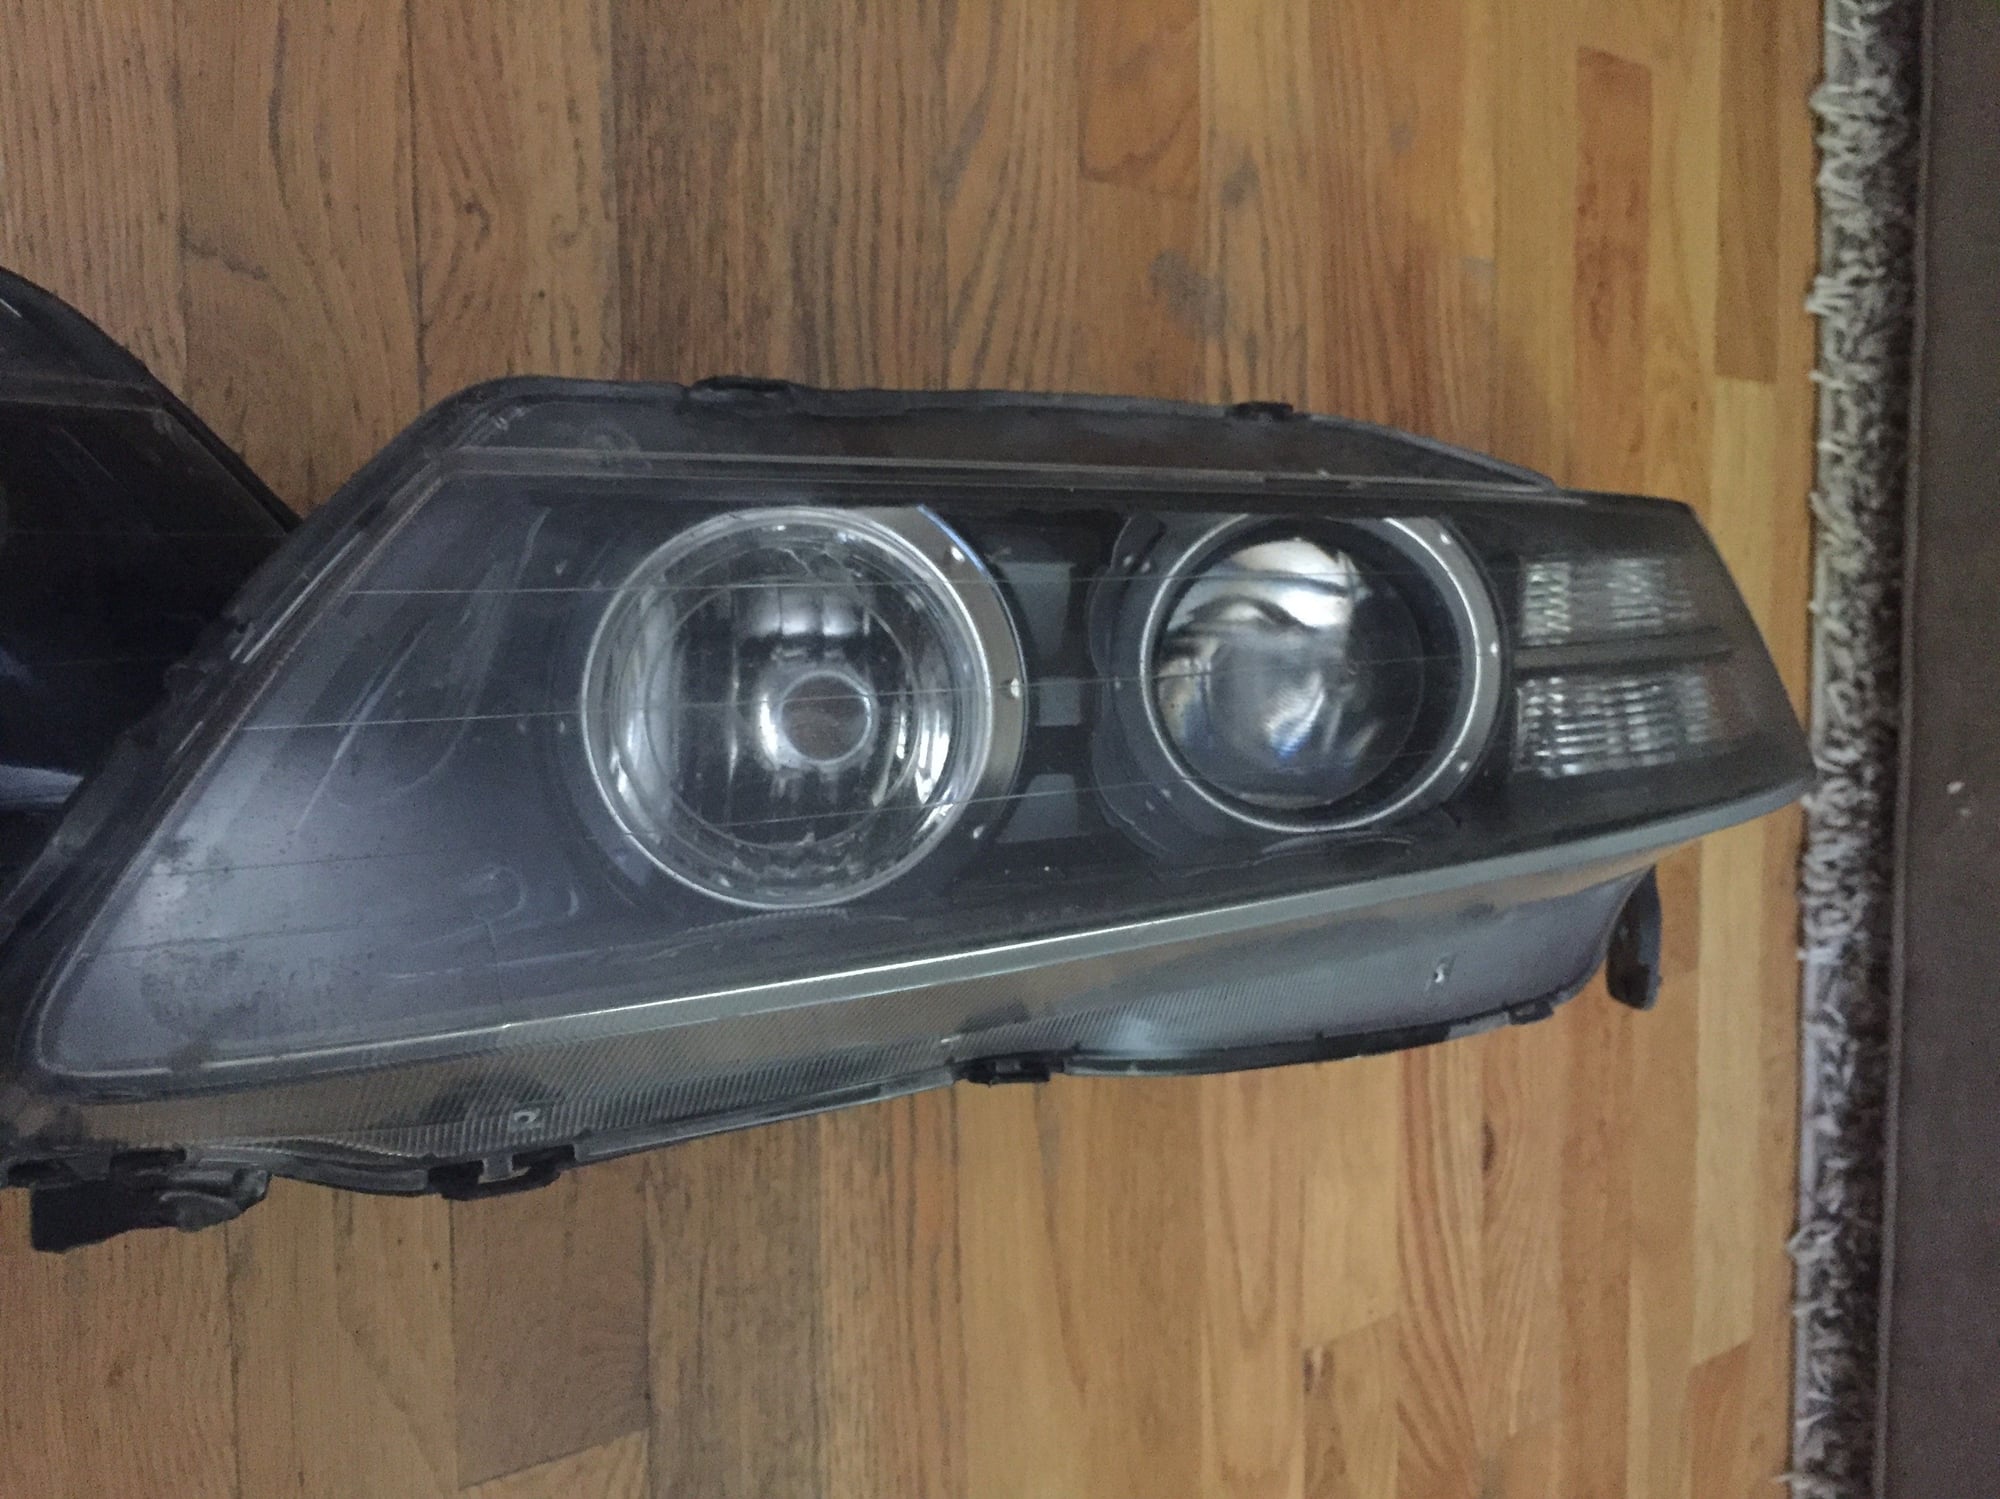 Lights - FS: Acura TL-S Headlights - 3rd Gen, 2004-2008 - Used - 2004 to 2008 Acura TL - Denver, CO 80209, United States